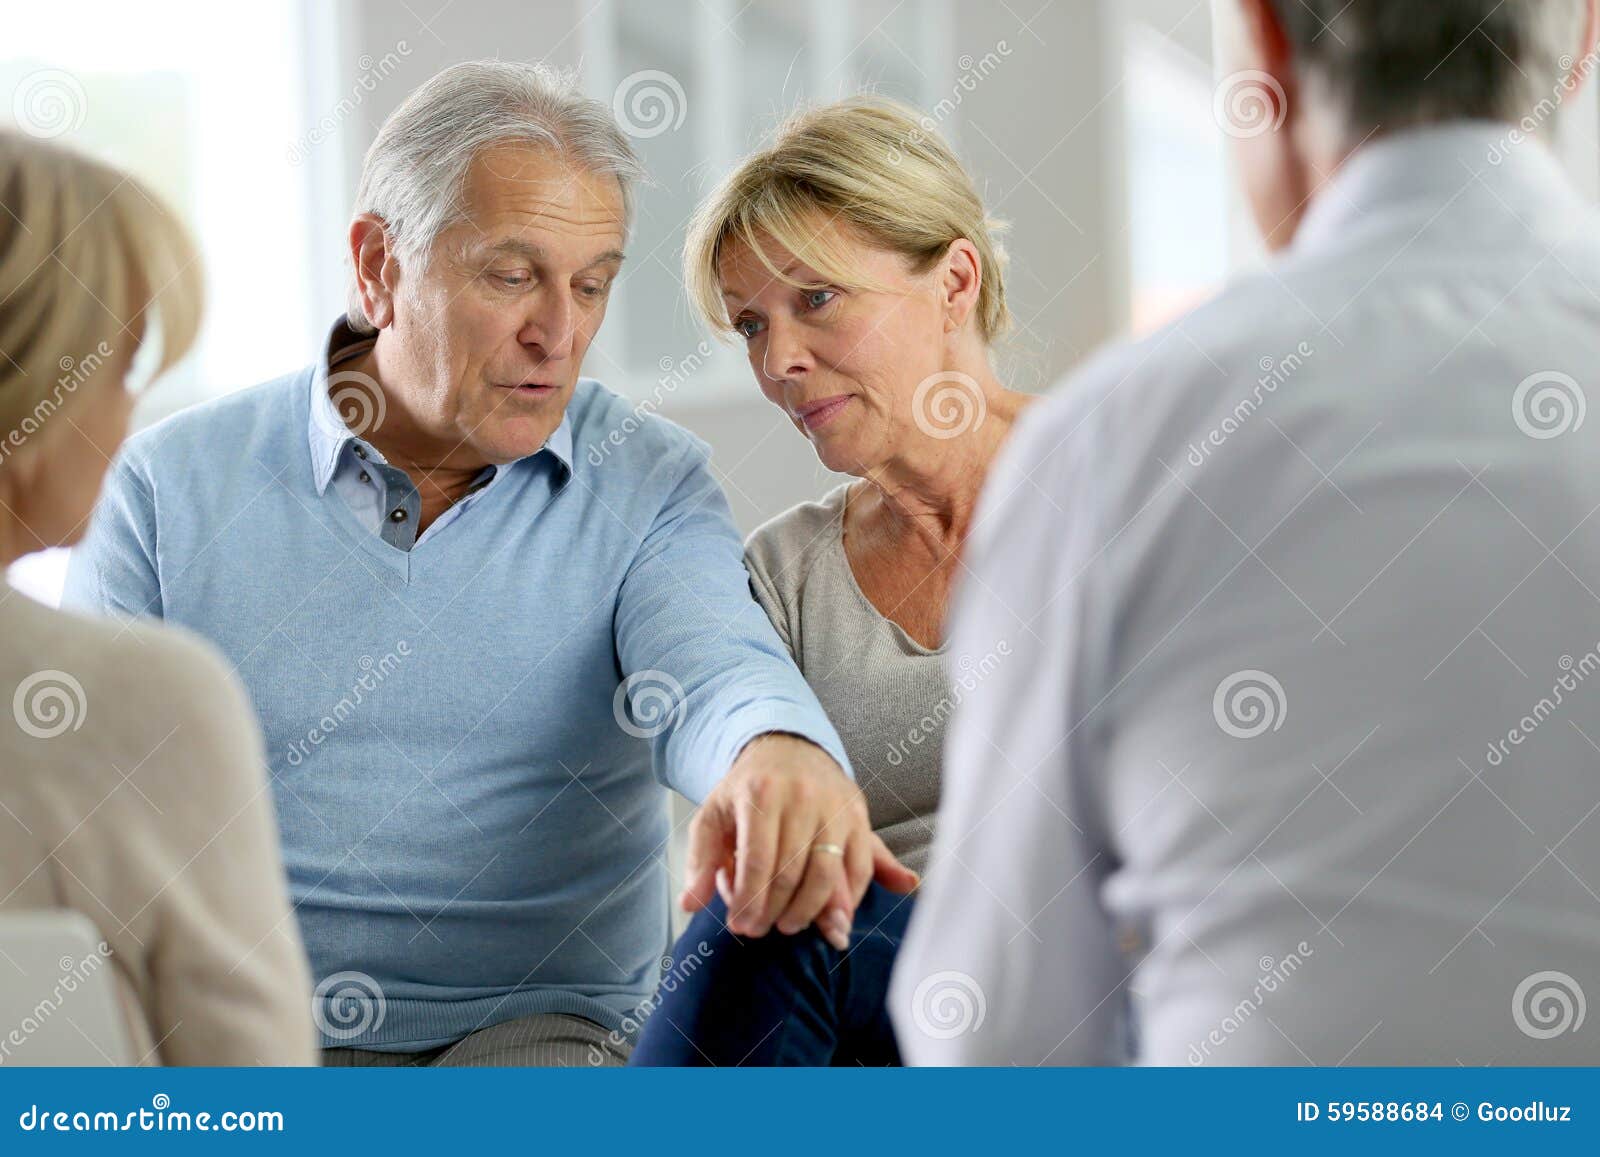 Group therapy older adult - Porn pic